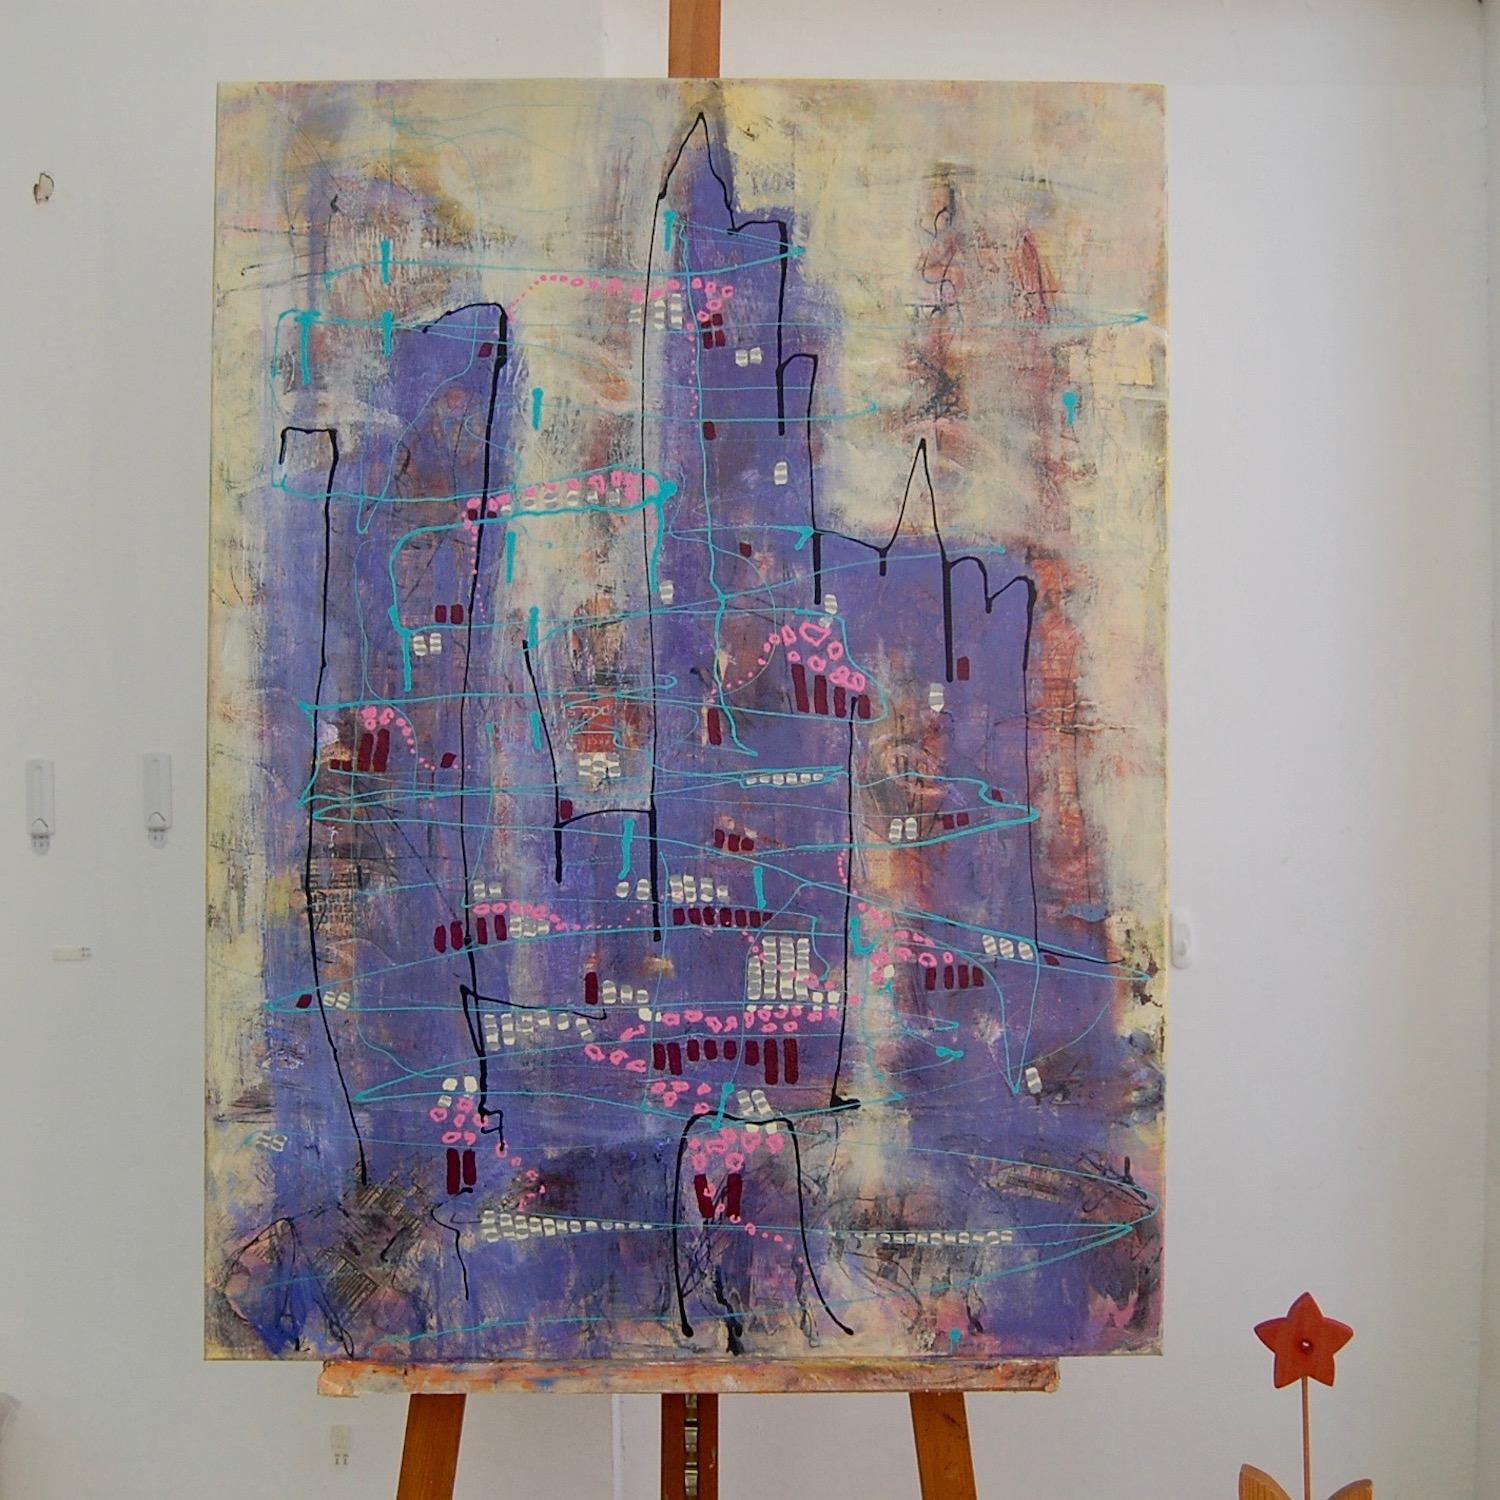 Whimsical Metropolis - Original Abstract Painting on Canvas - Surreal Art for Home Decor - Fantasy City Mood - Unique Cityscape - Blue Art